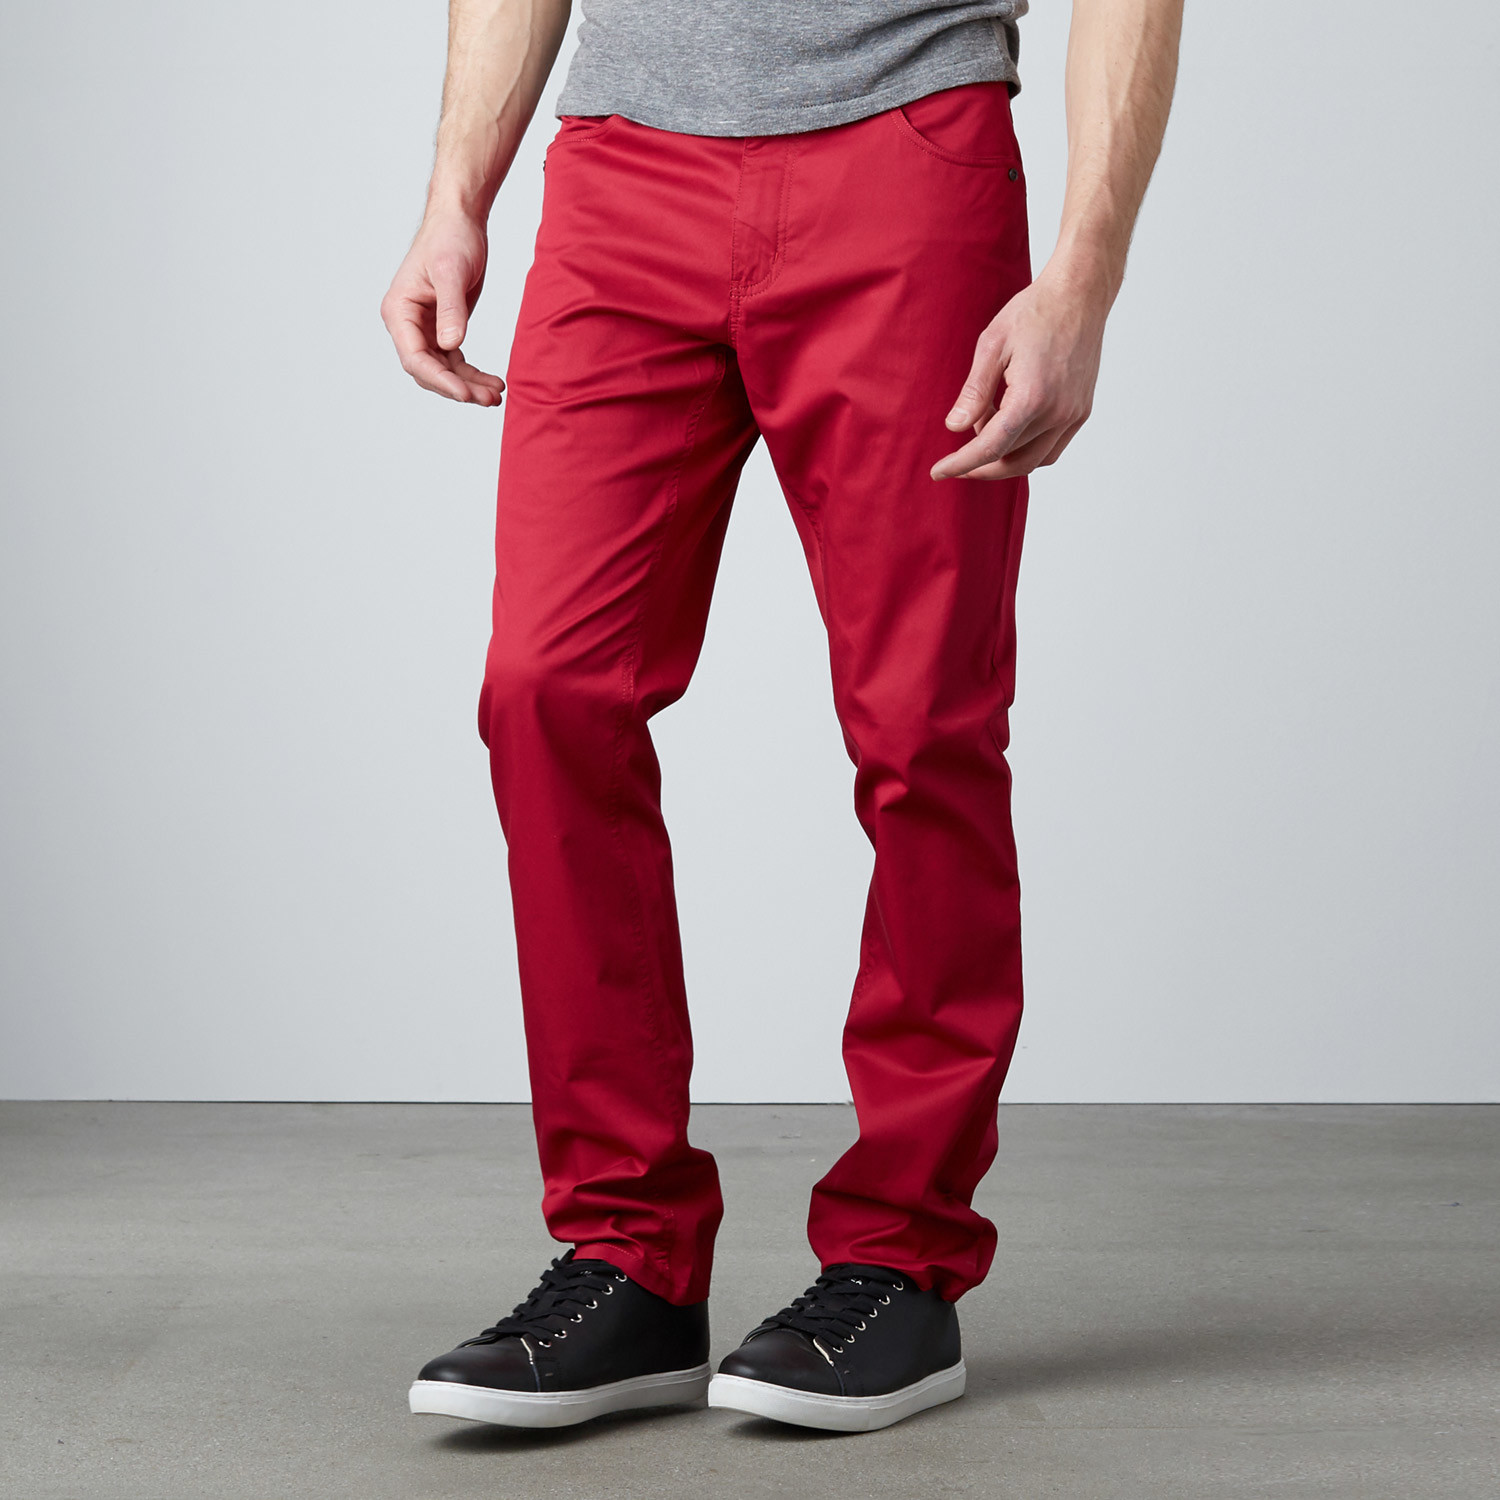 Love the idea of cranberry colored pants